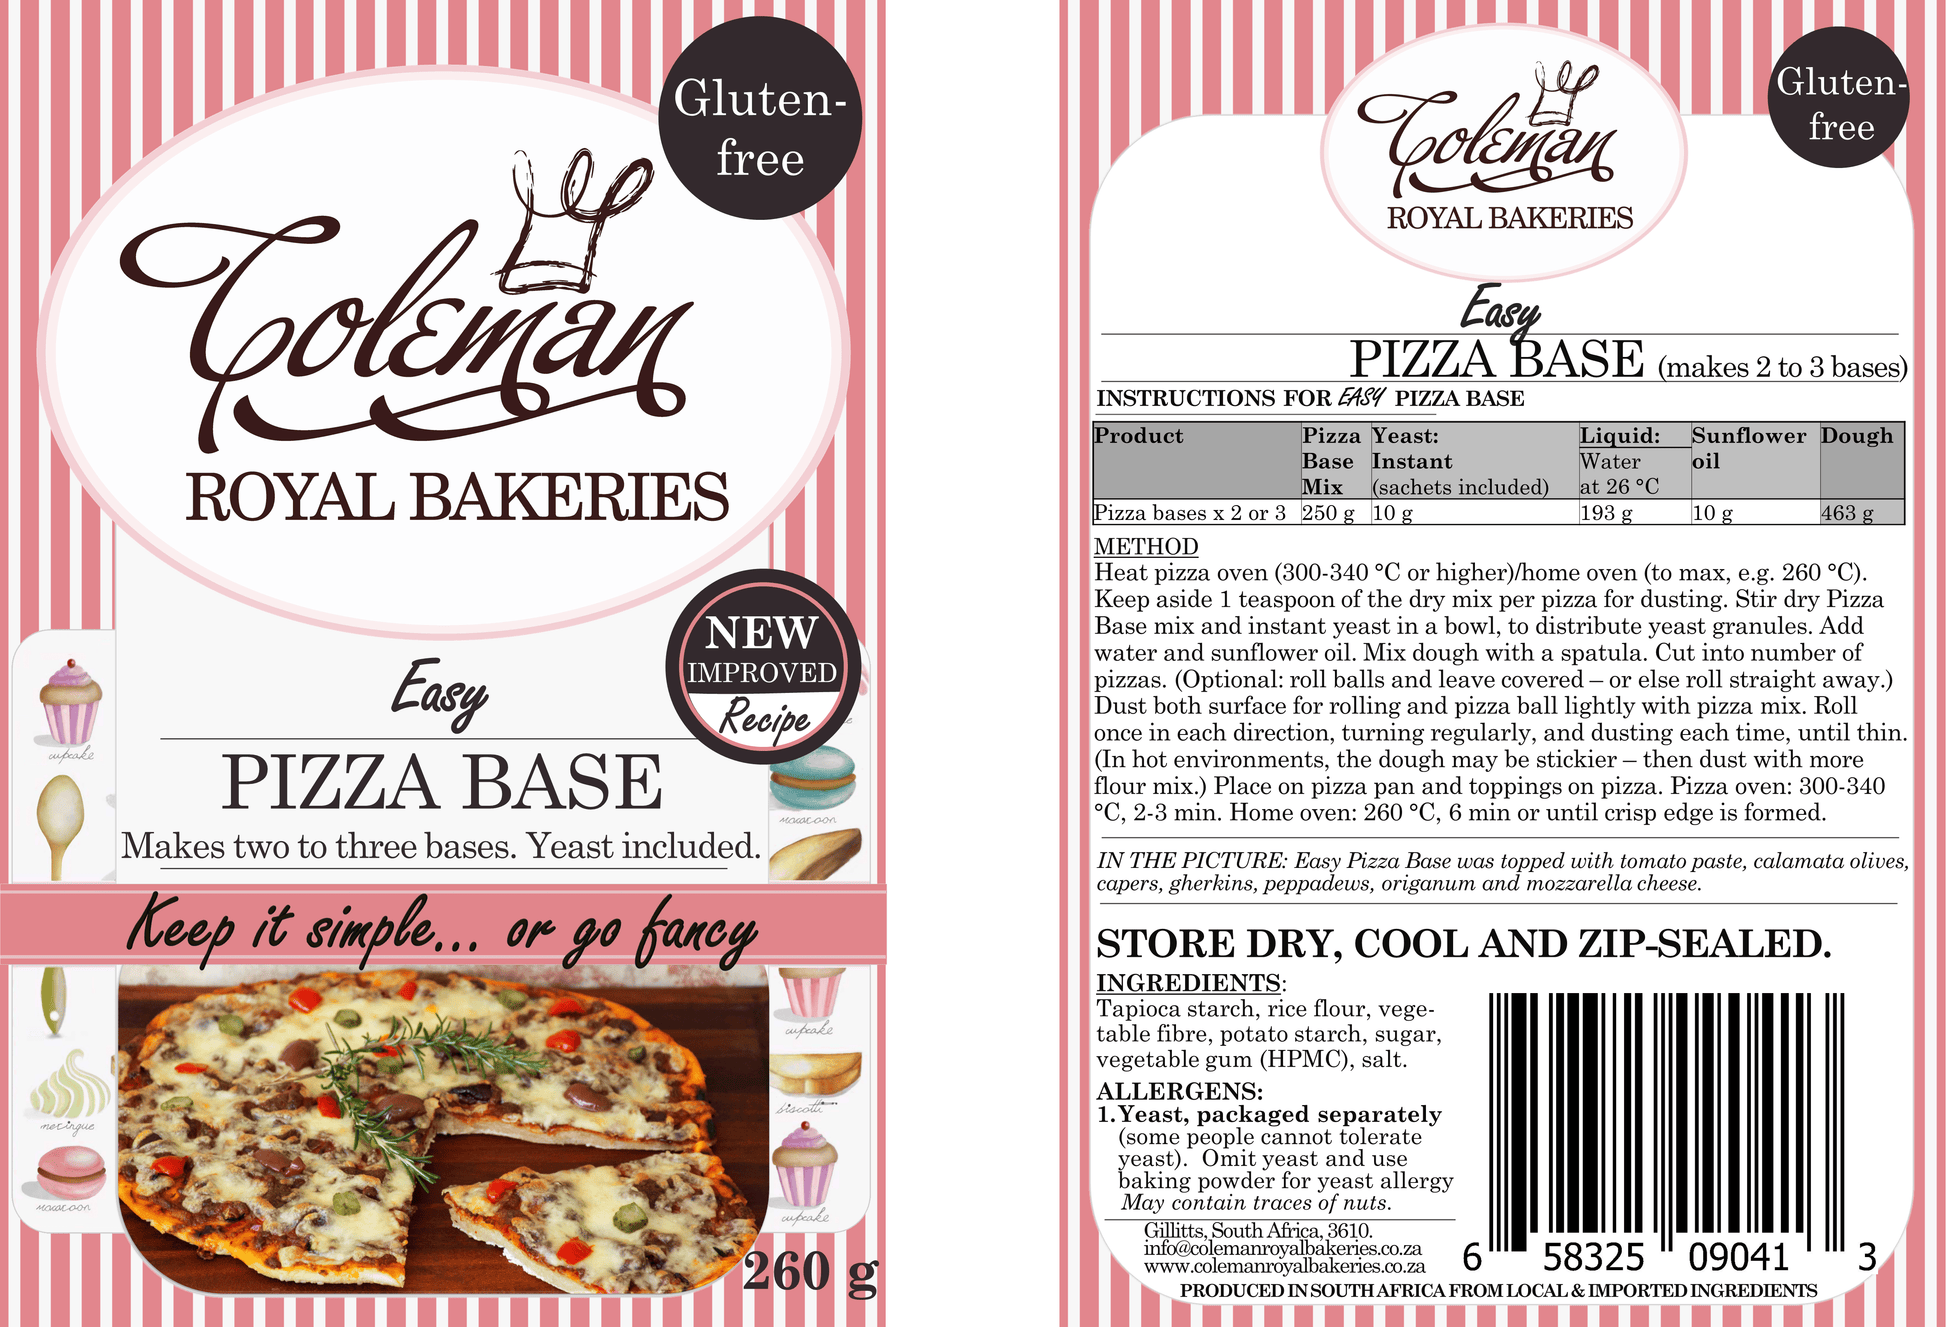 Pizza Base, makes 2-3 bases (Gluten-free). Includes 10 g yeast sachet. - Coleman Royal Bakeries